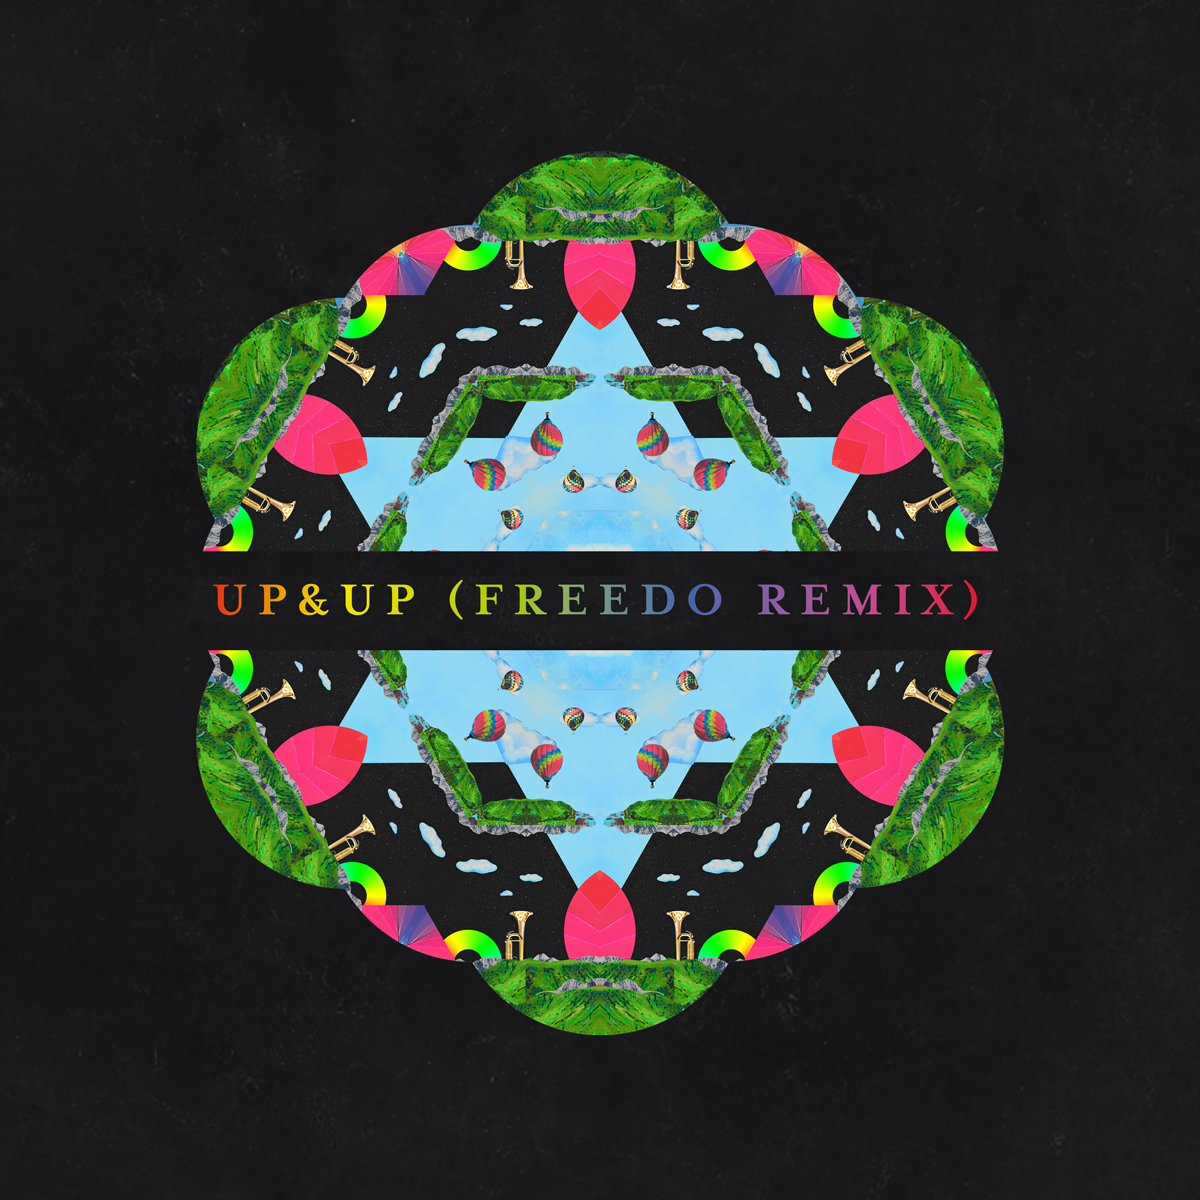 Check out the Freedo remix of Up&Up